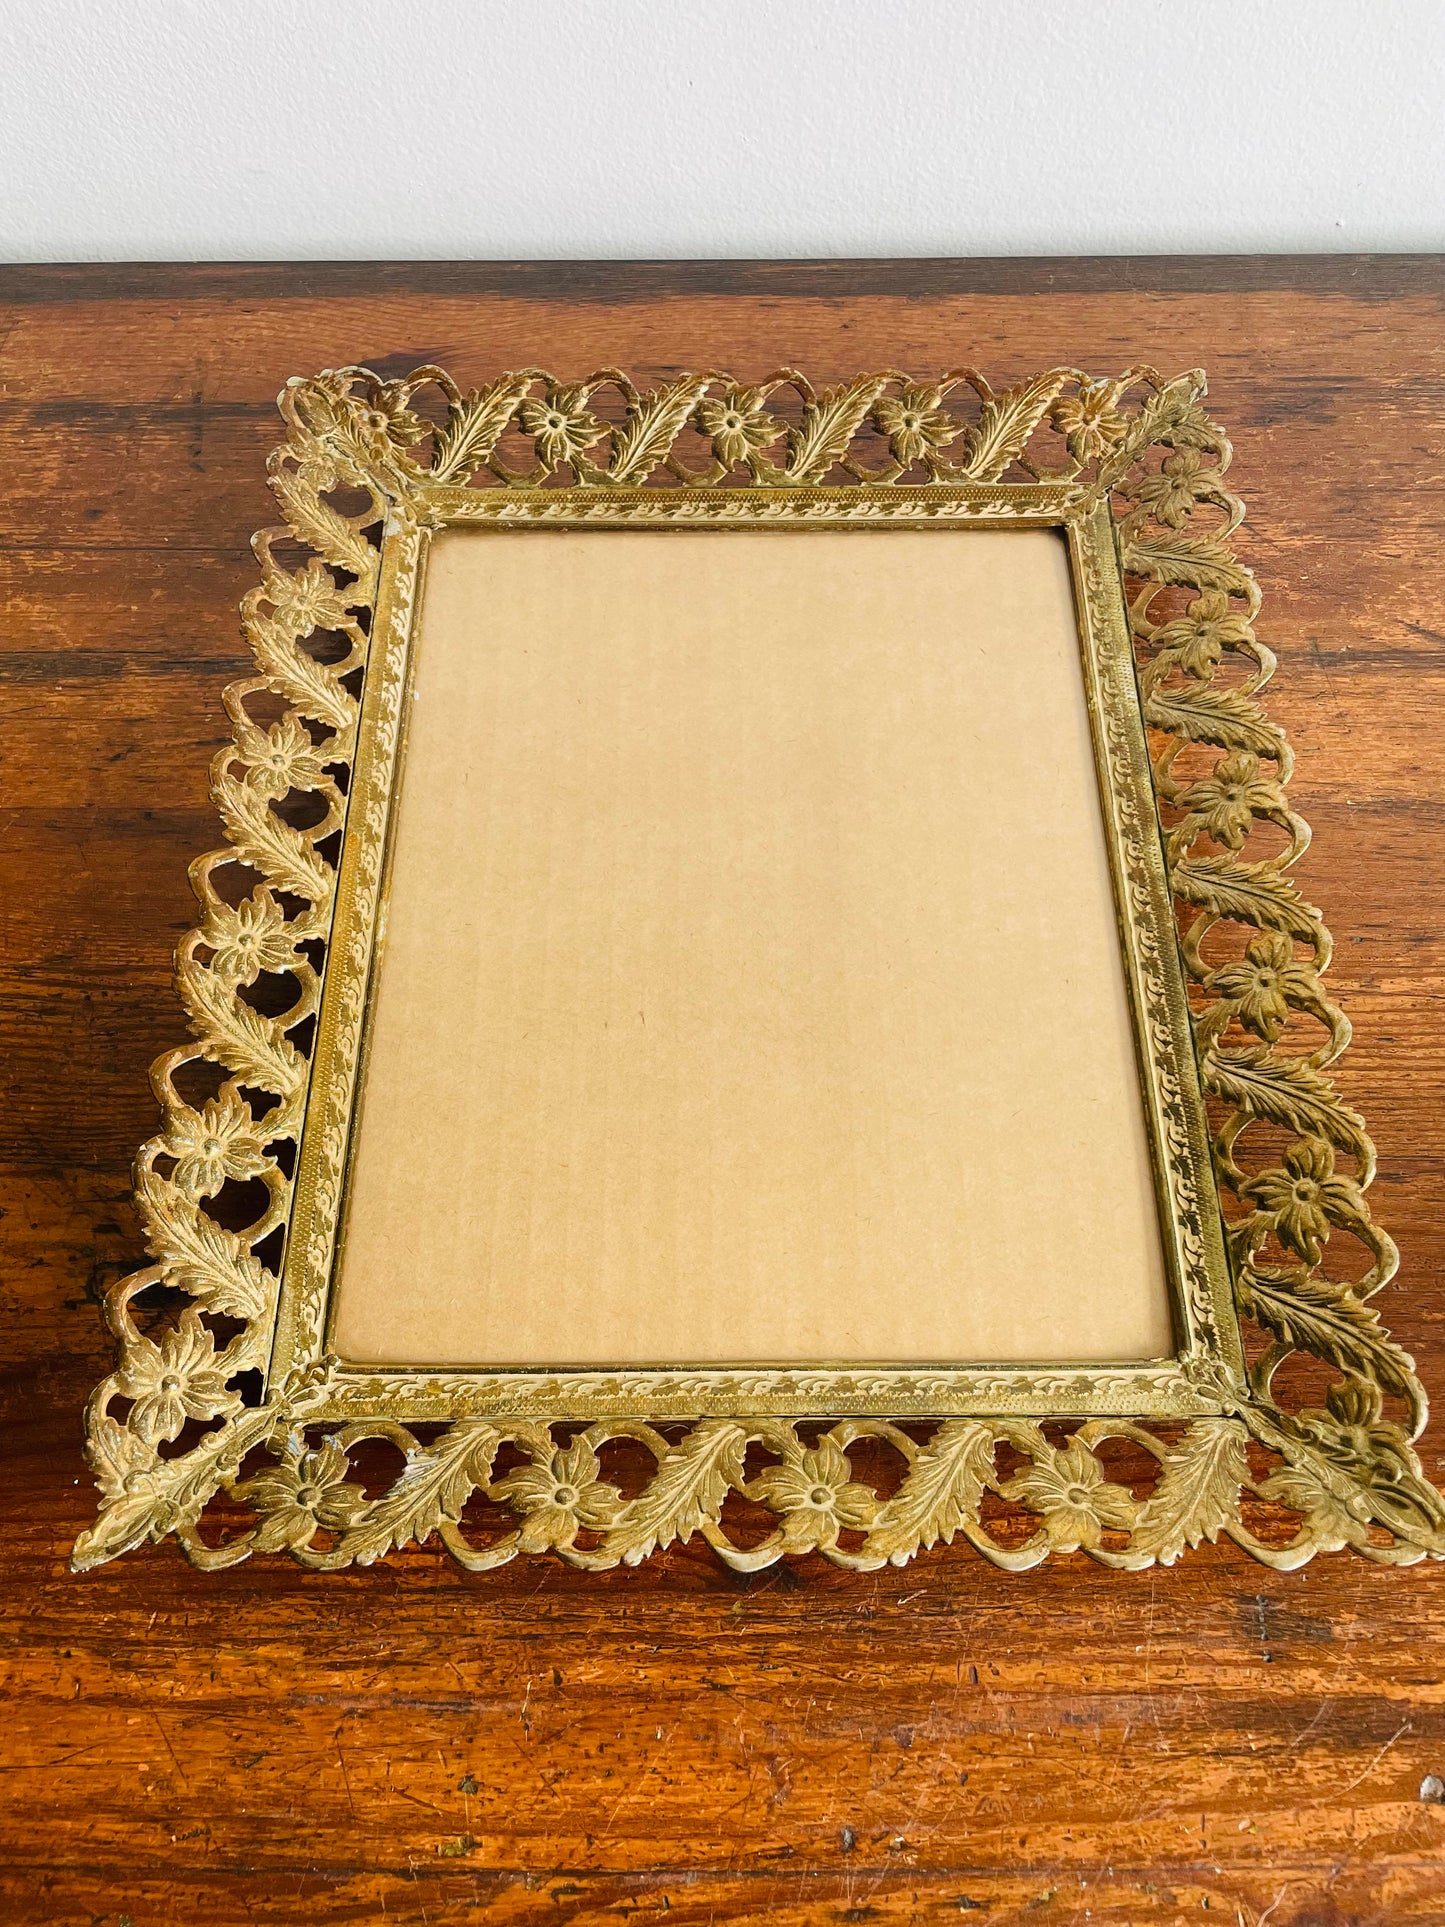 Large Ornate Brass Picture Frame with Ornate Floral Filigree & Wall Hooks to Hang